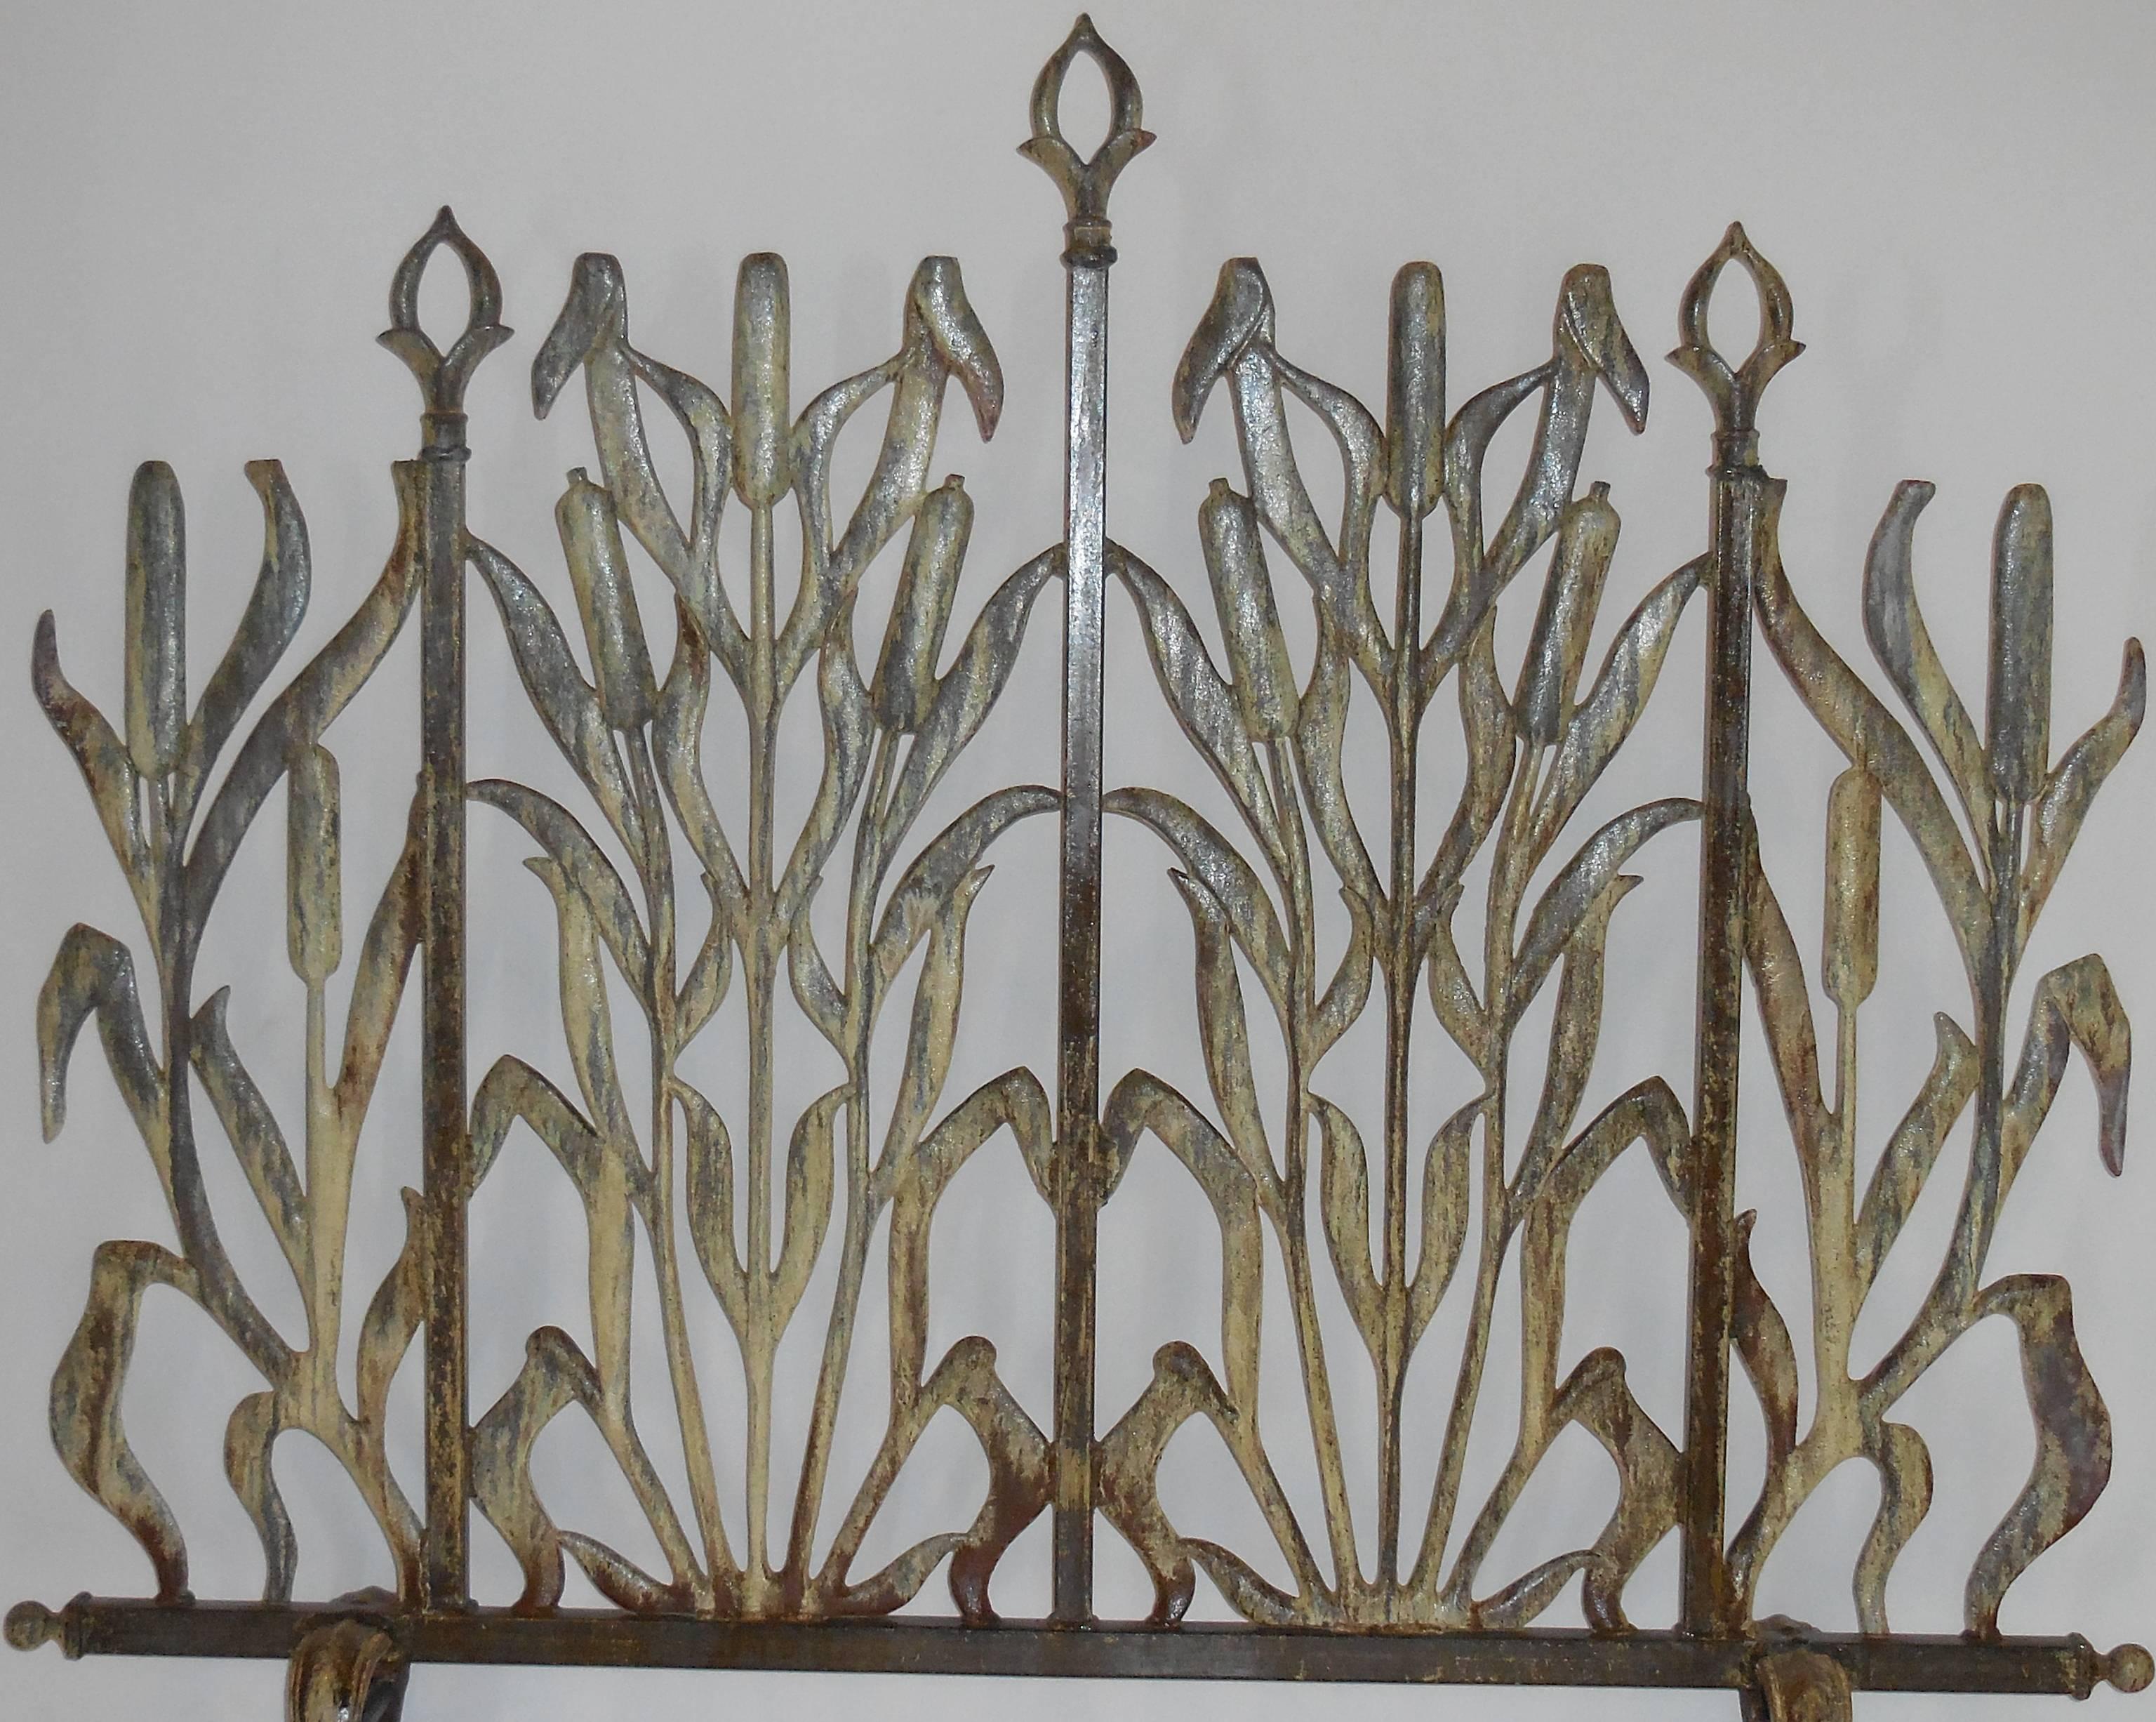 One of a Kind fireplace screen made of cast iron with decorative motif of cat tail
and arrows.
Great patina.